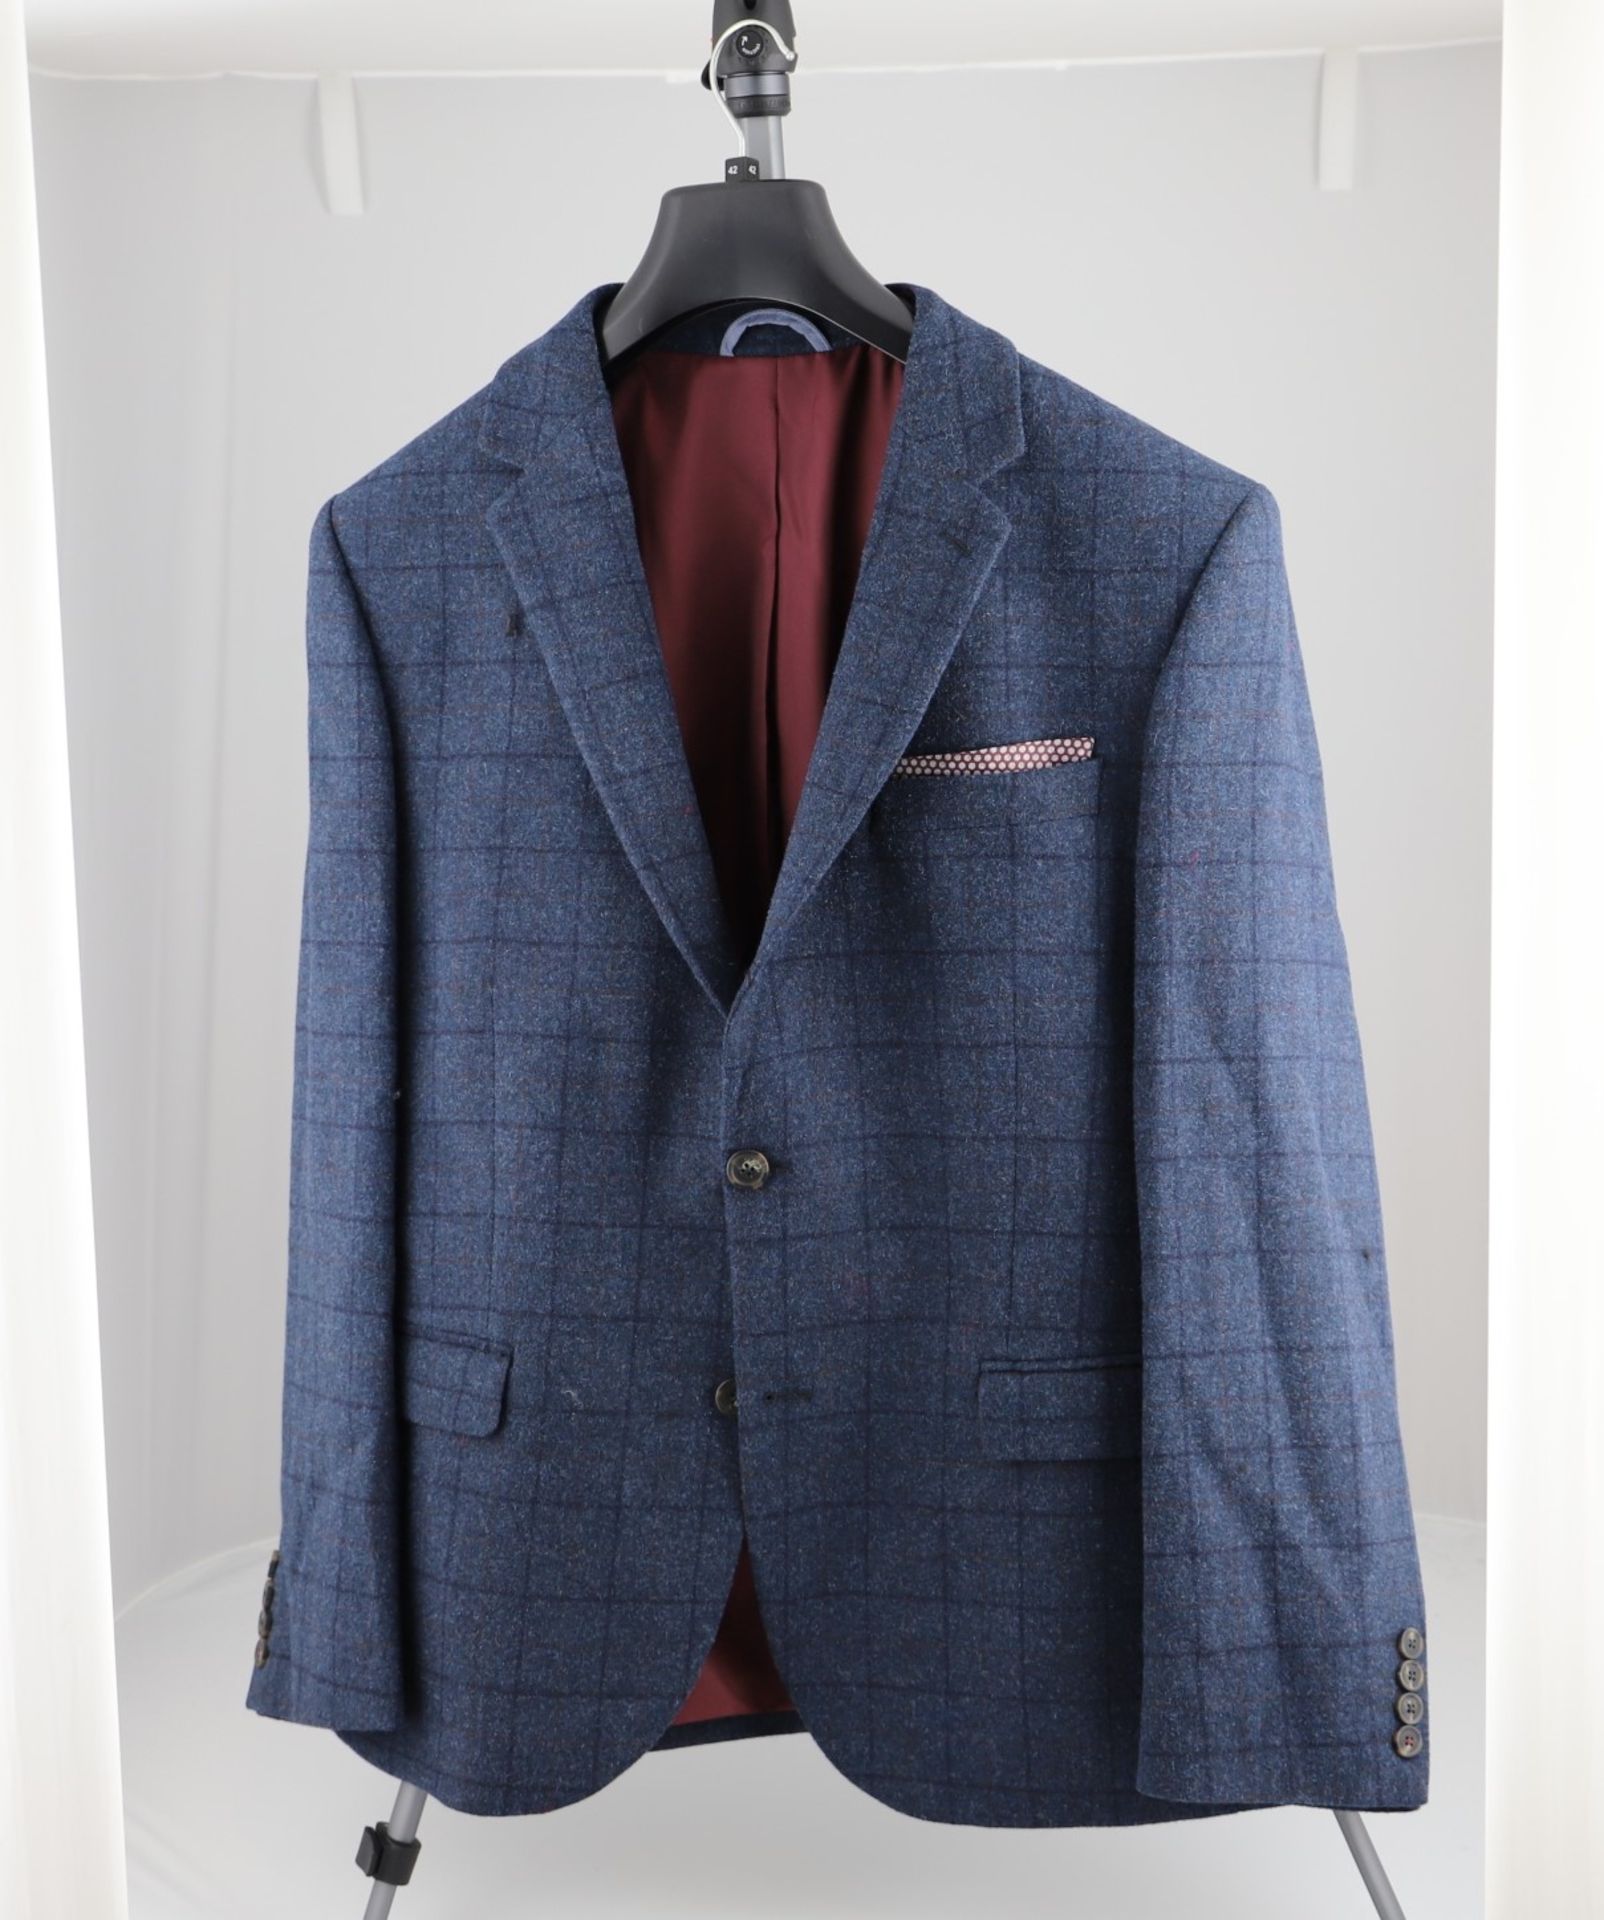 1 x mixed pallet = 104 items of Grade A M&S Menswear Clothing. Approx Total RRP £8,439